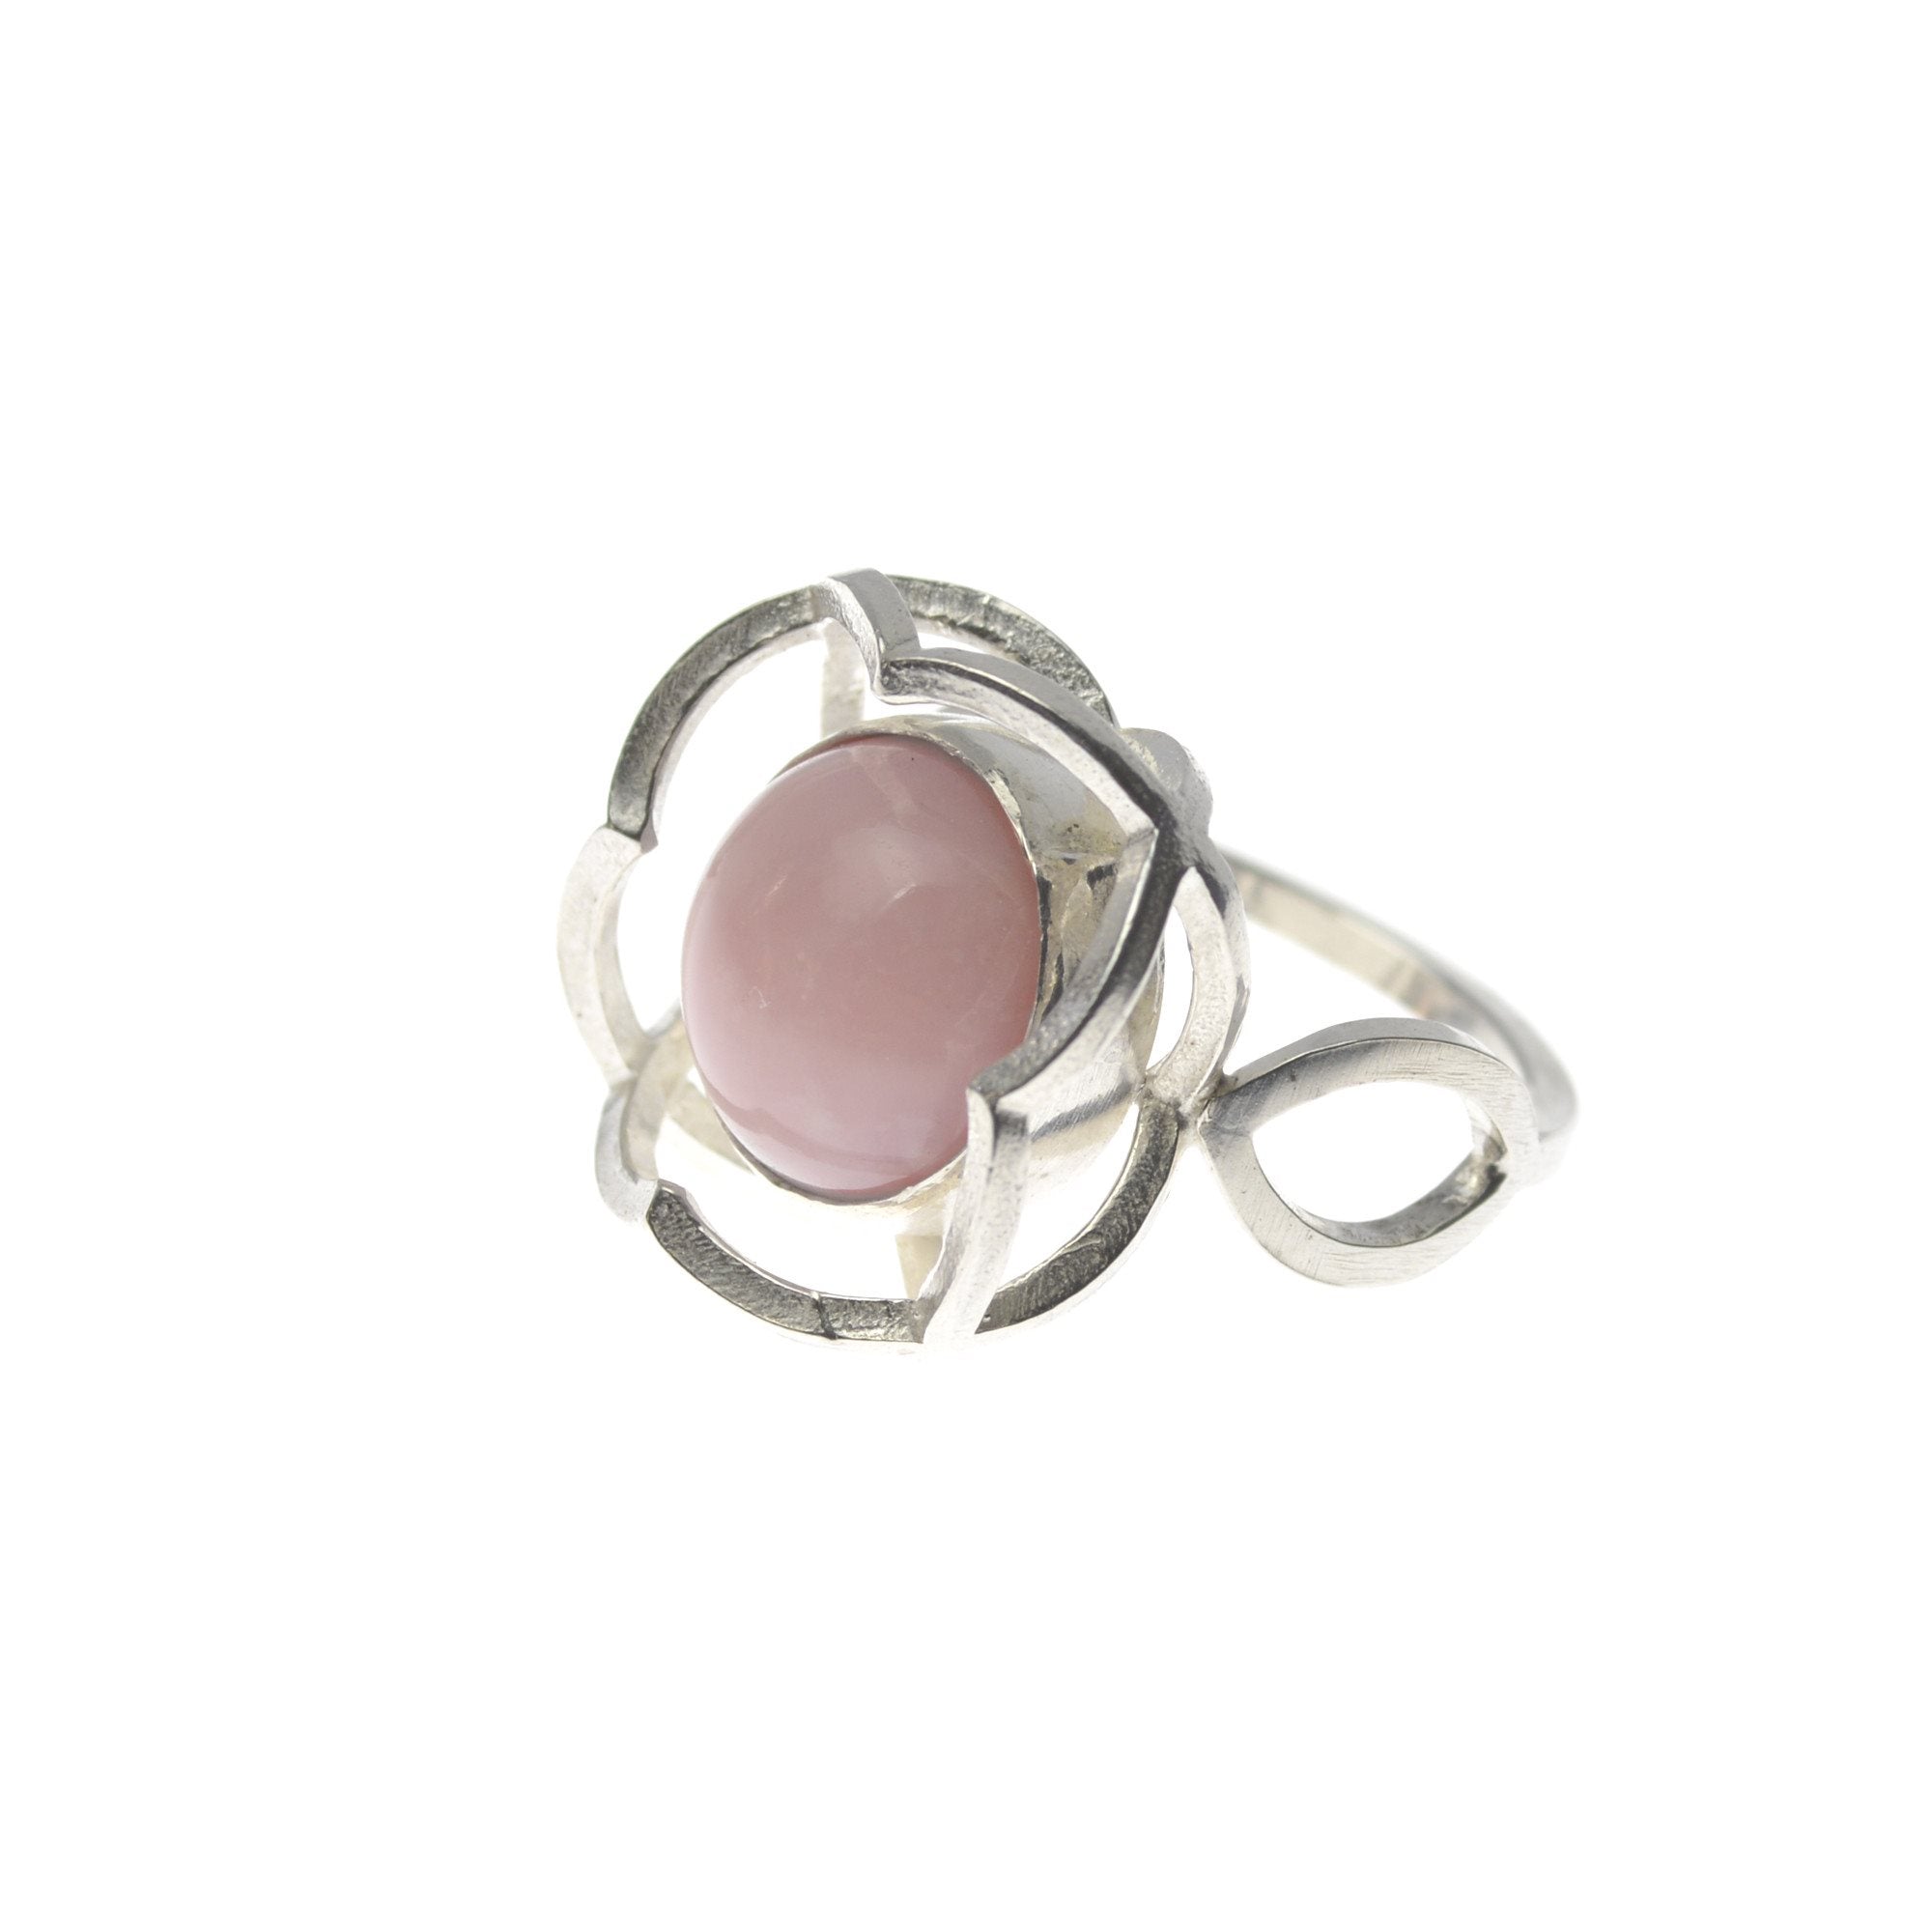 Quatrefoil Ring with Peruvian Pink Opal set in Sterling Silver